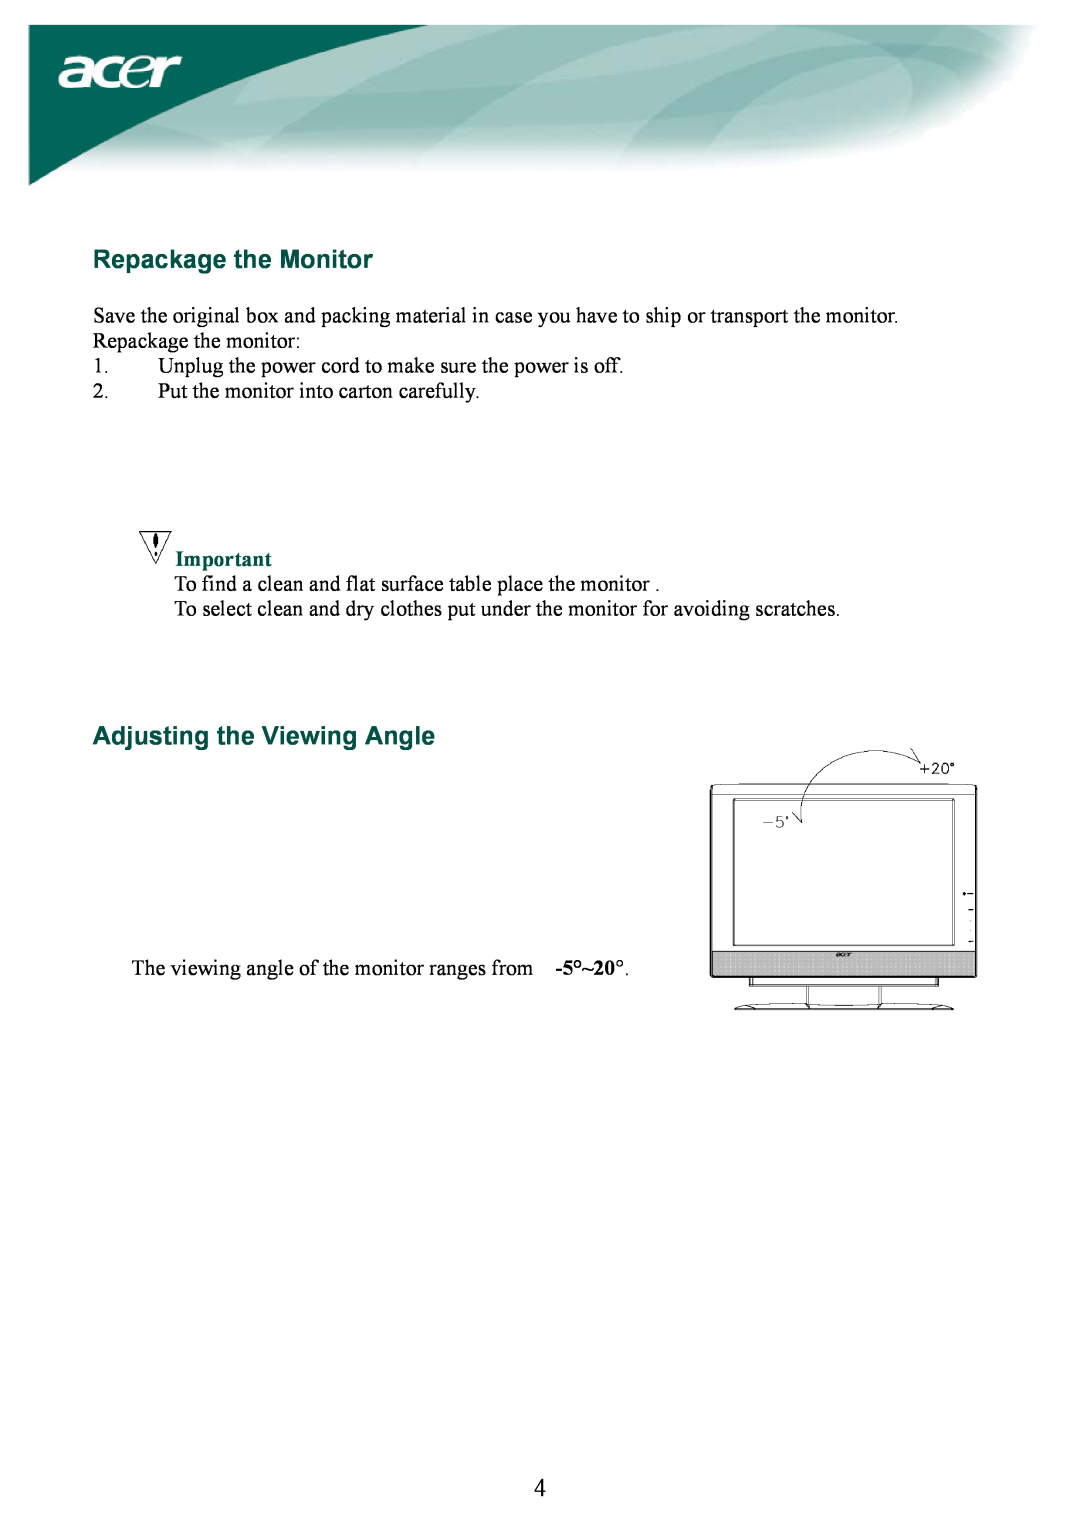 Acer AL2032W installation instructions Repackage the Monitor, Adjusting the Viewing Angle 